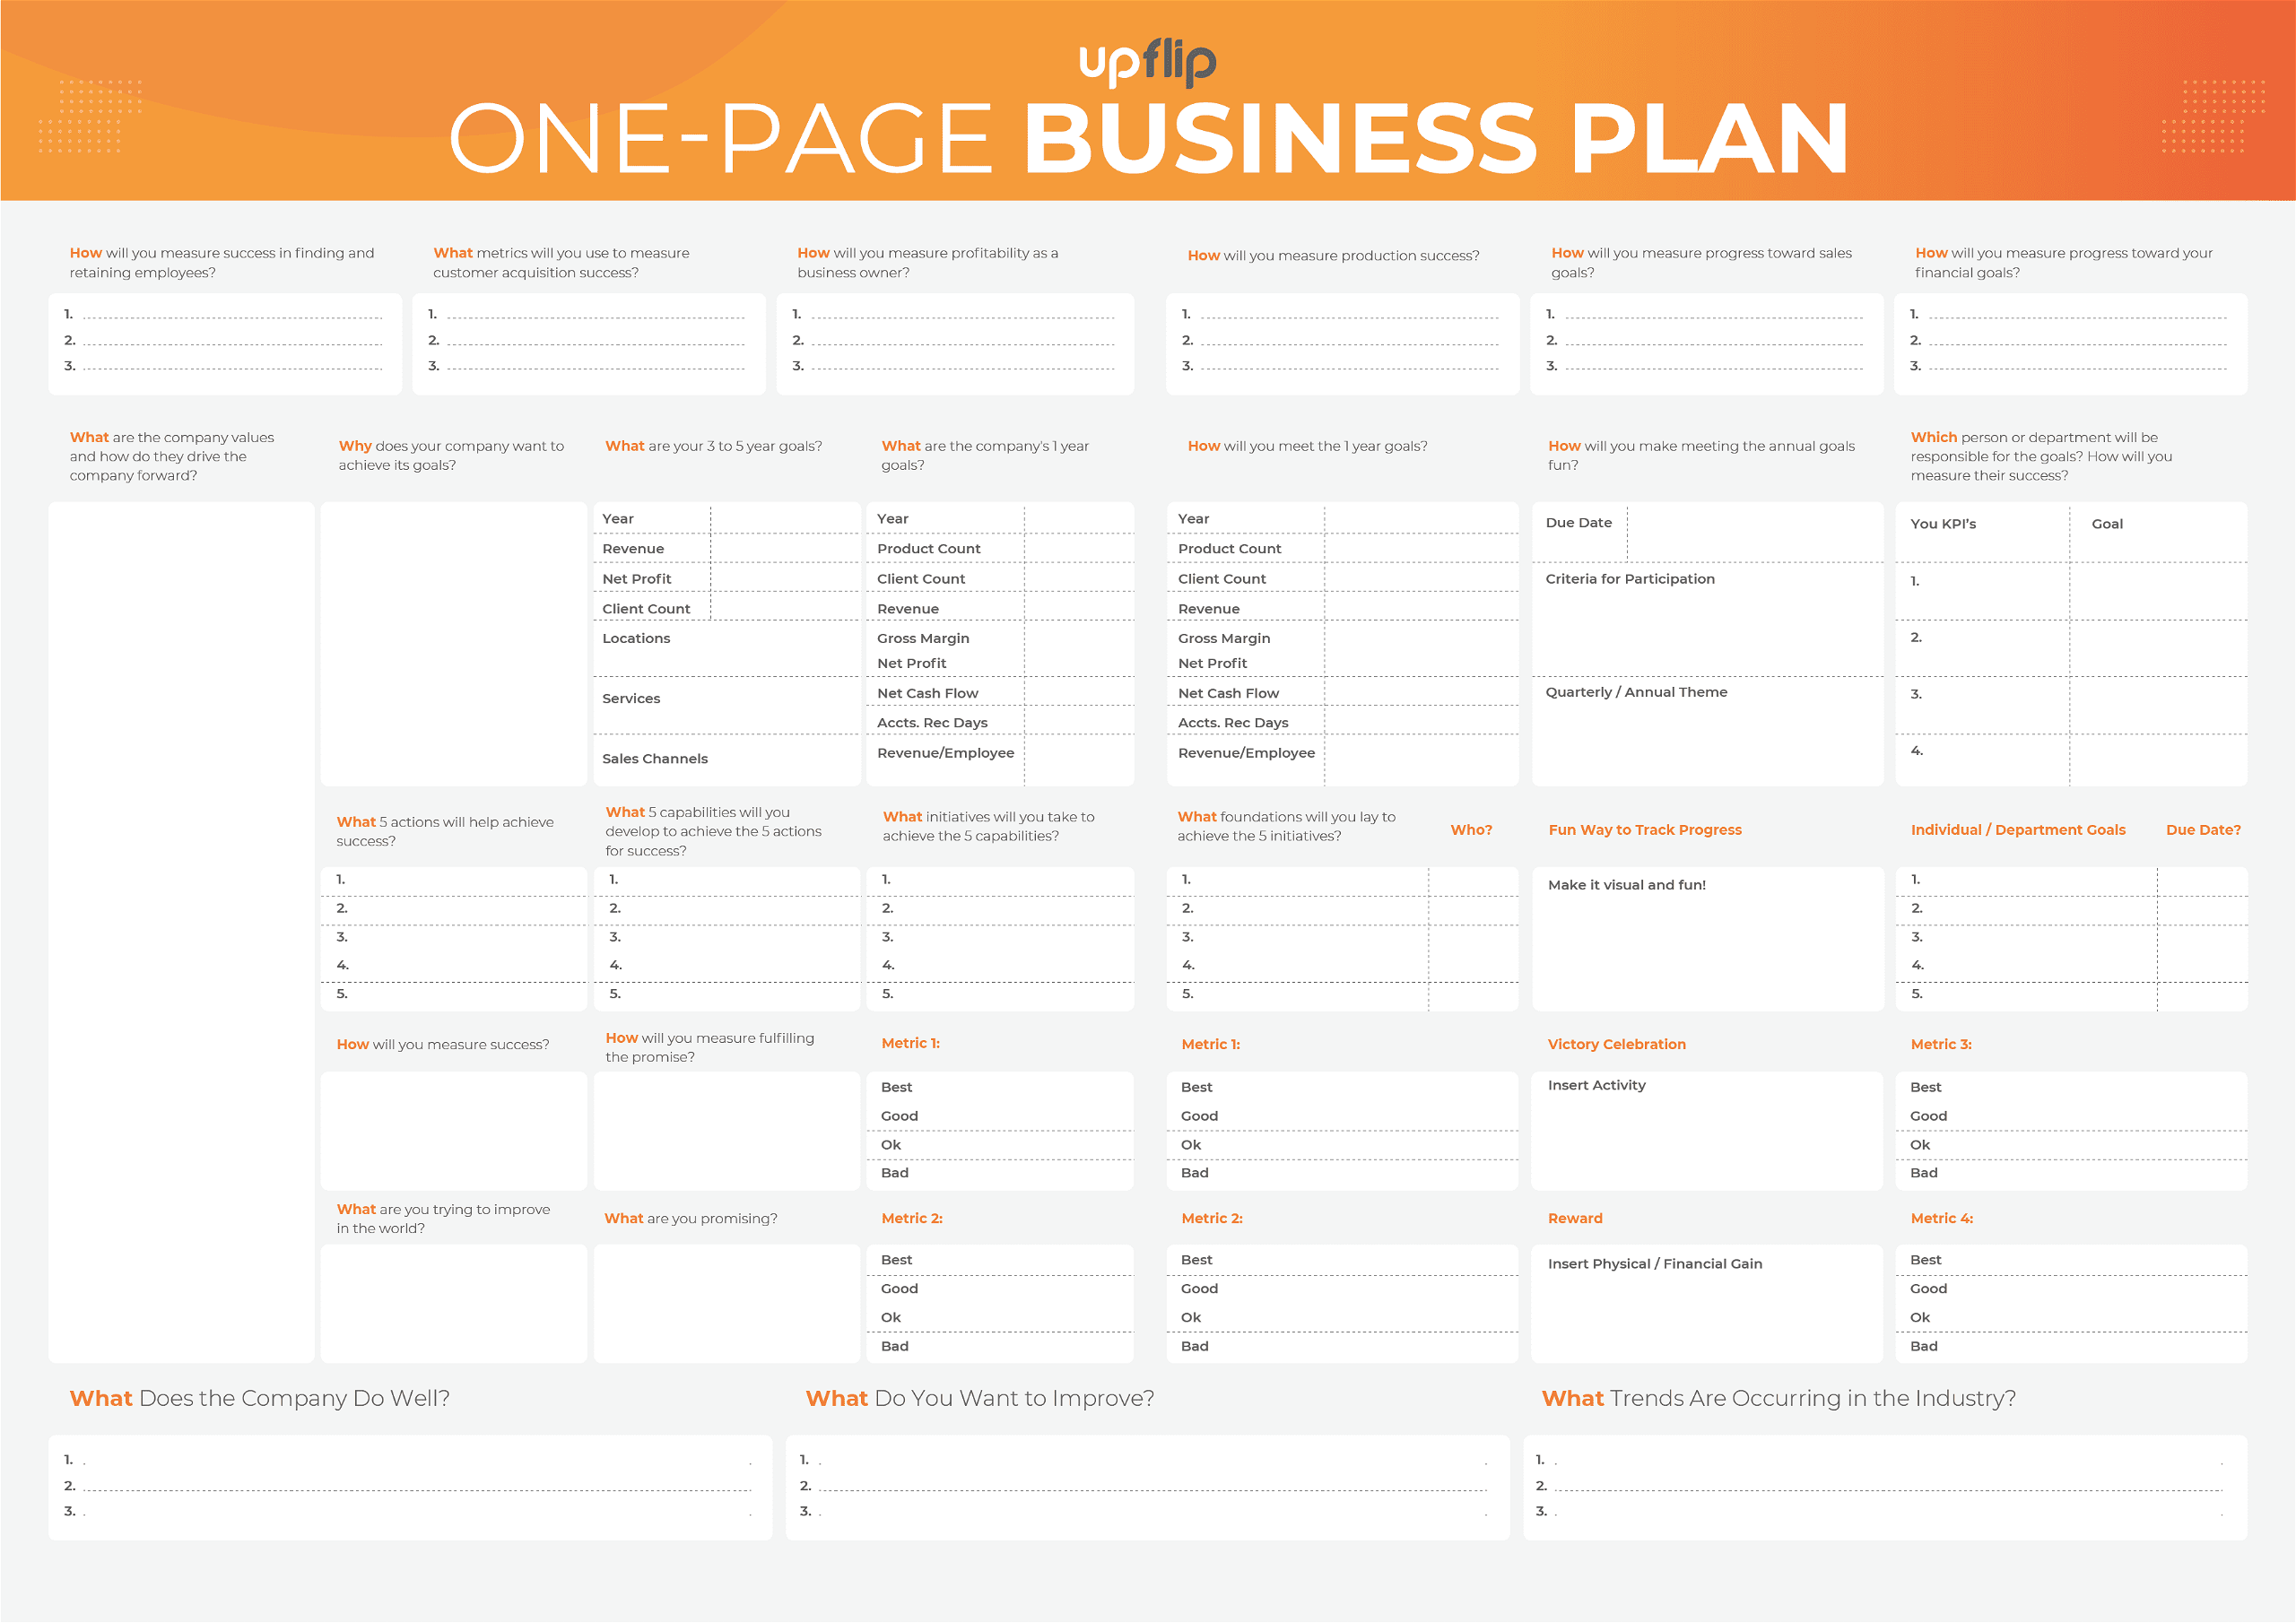 One-page business plan document